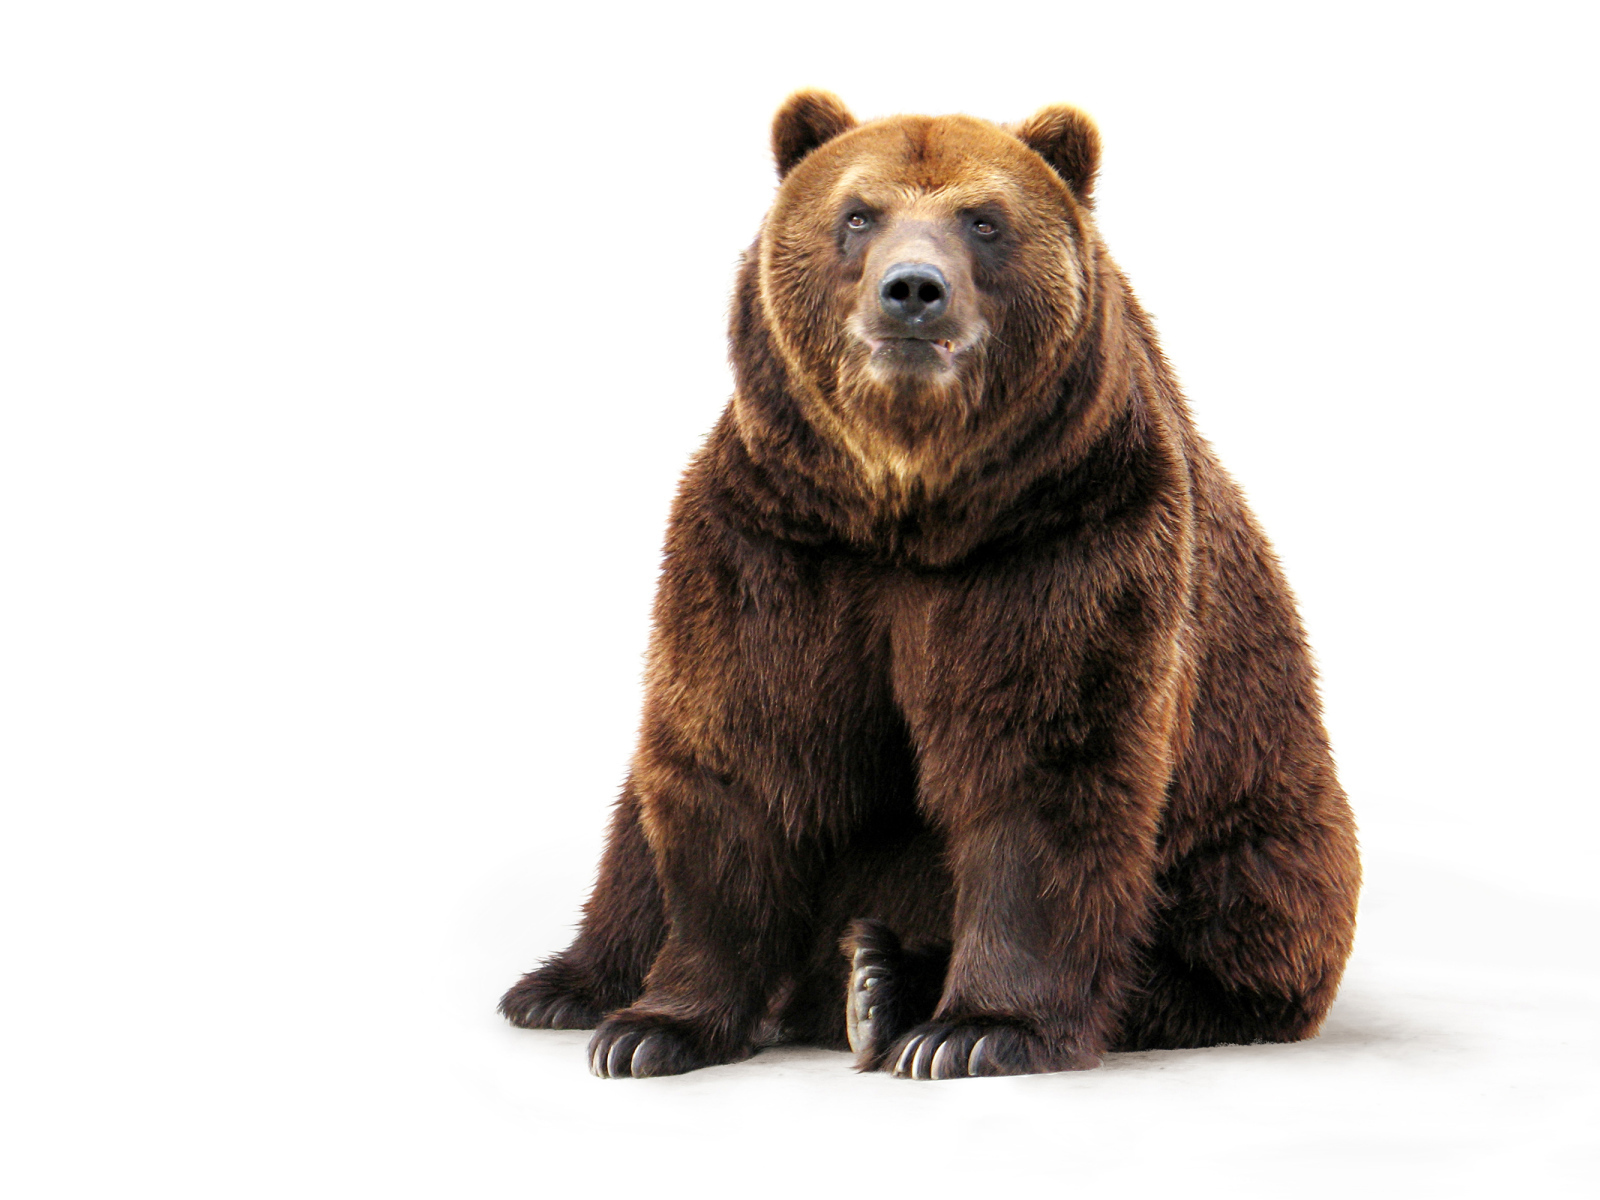 Big brown bear on a white background